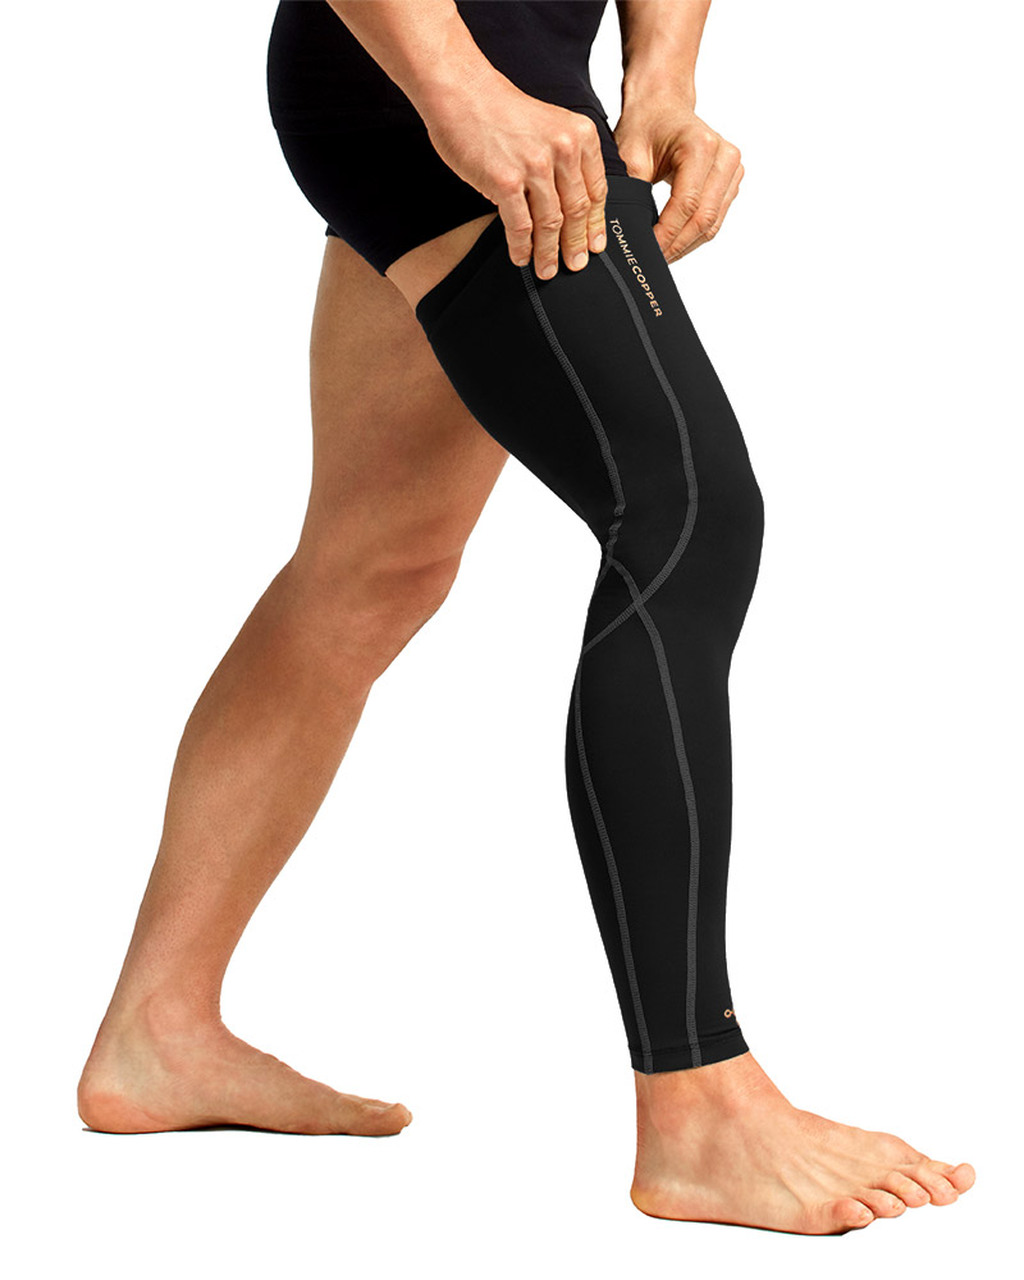 Full Leg Compression Sleeve - Complete Guide (with Pictures!)